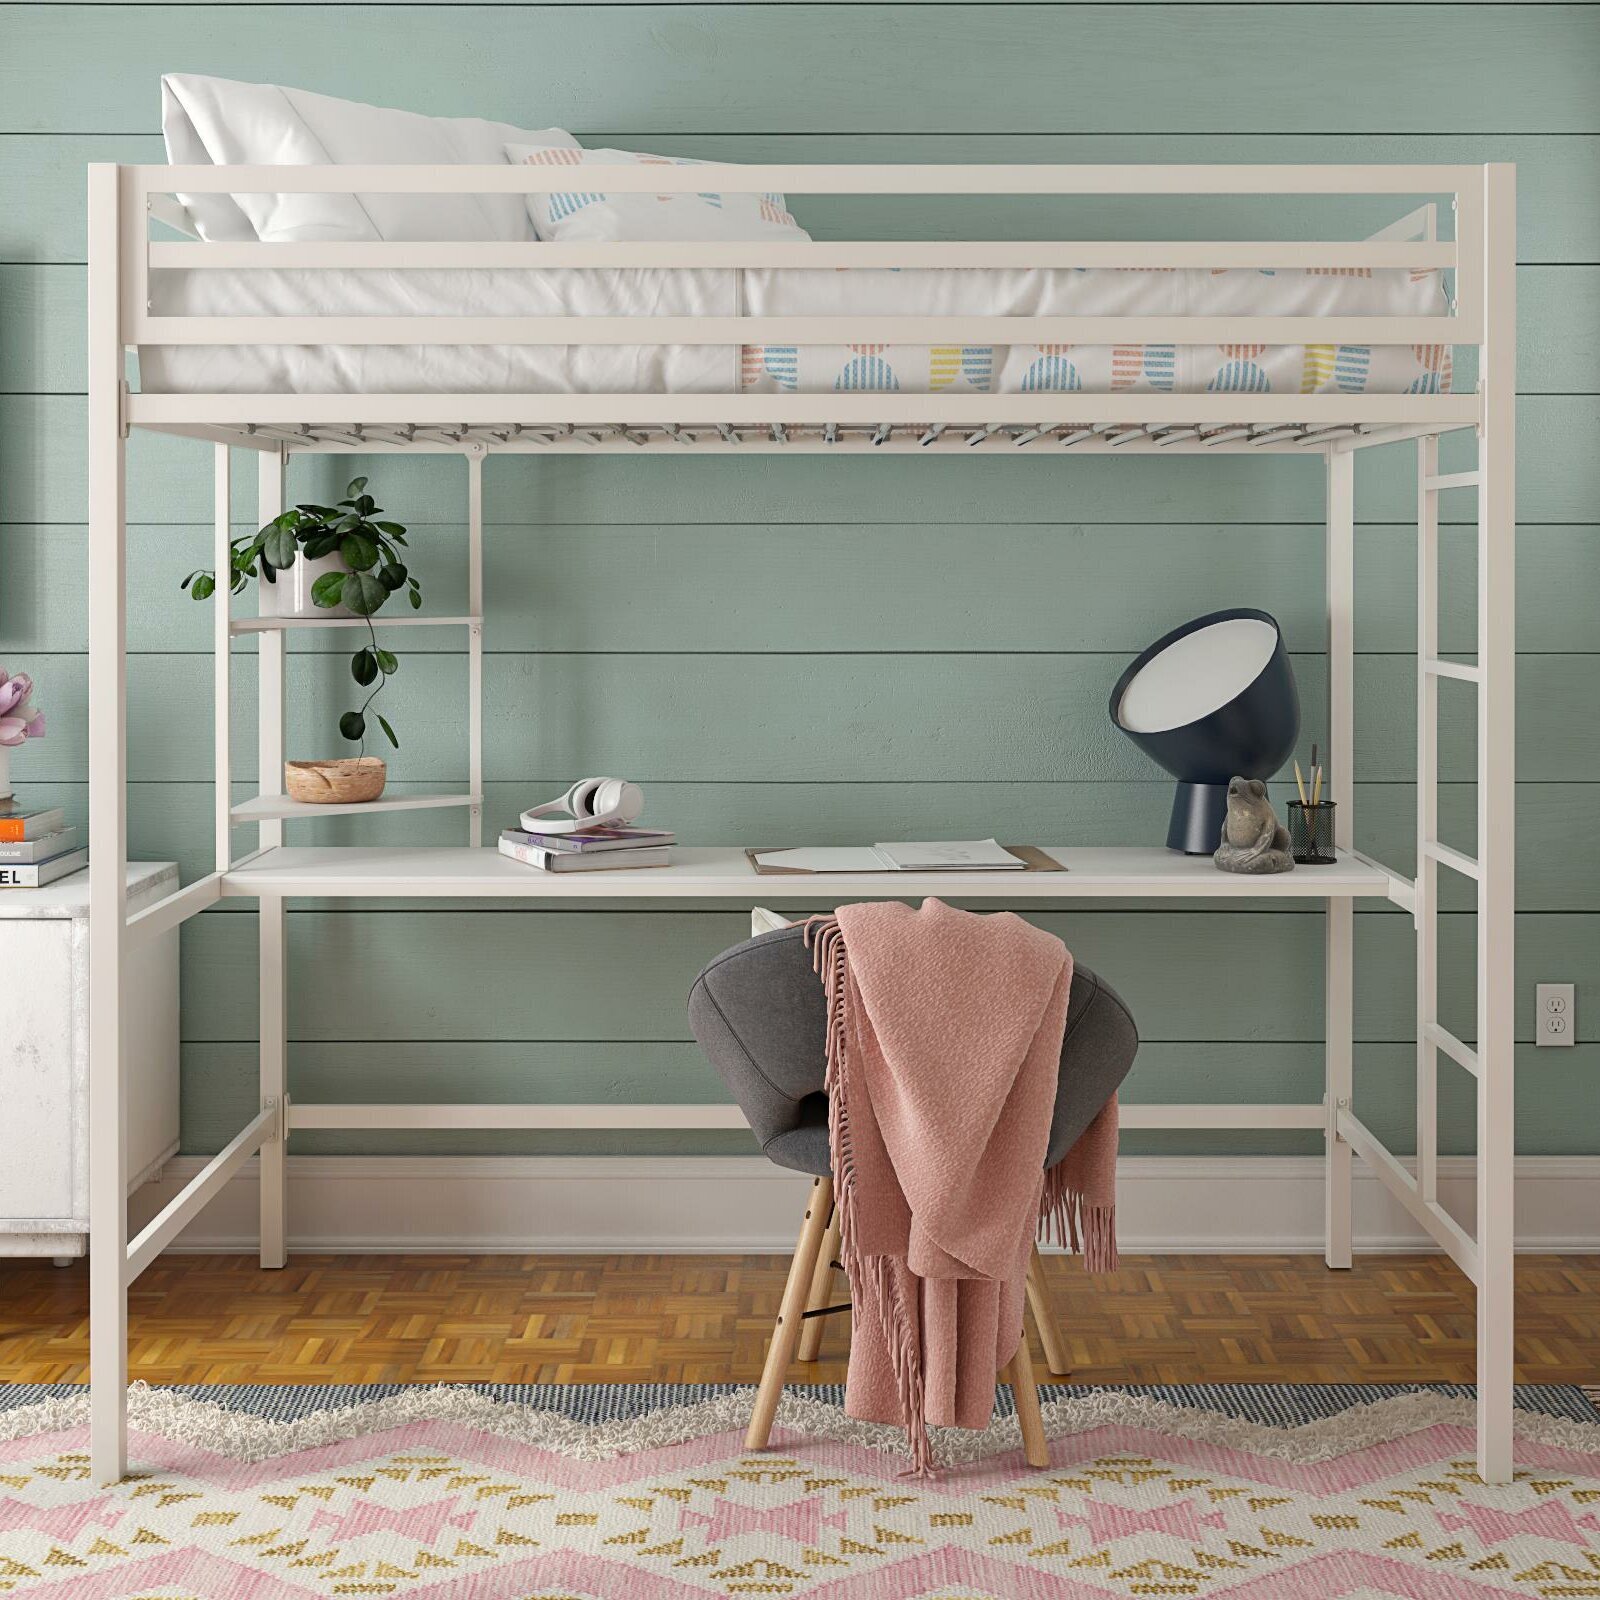 Metal Bunk Bed With Seating Area